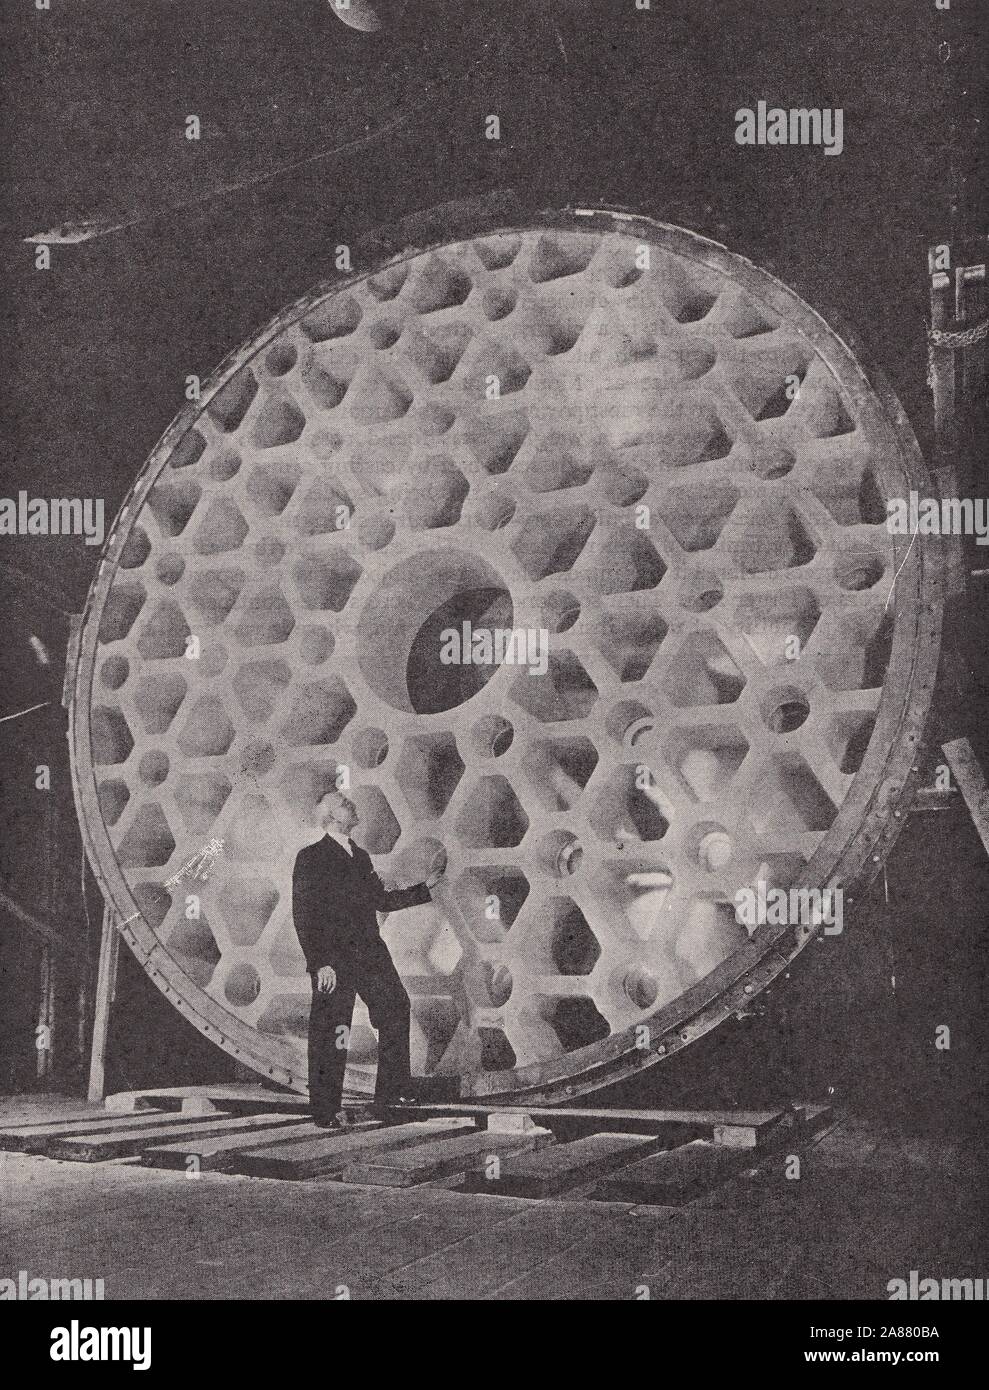 Back view of the mirror-disc for the 200-inch mirror reflector based at the California Institute of Technology. Stock Photo